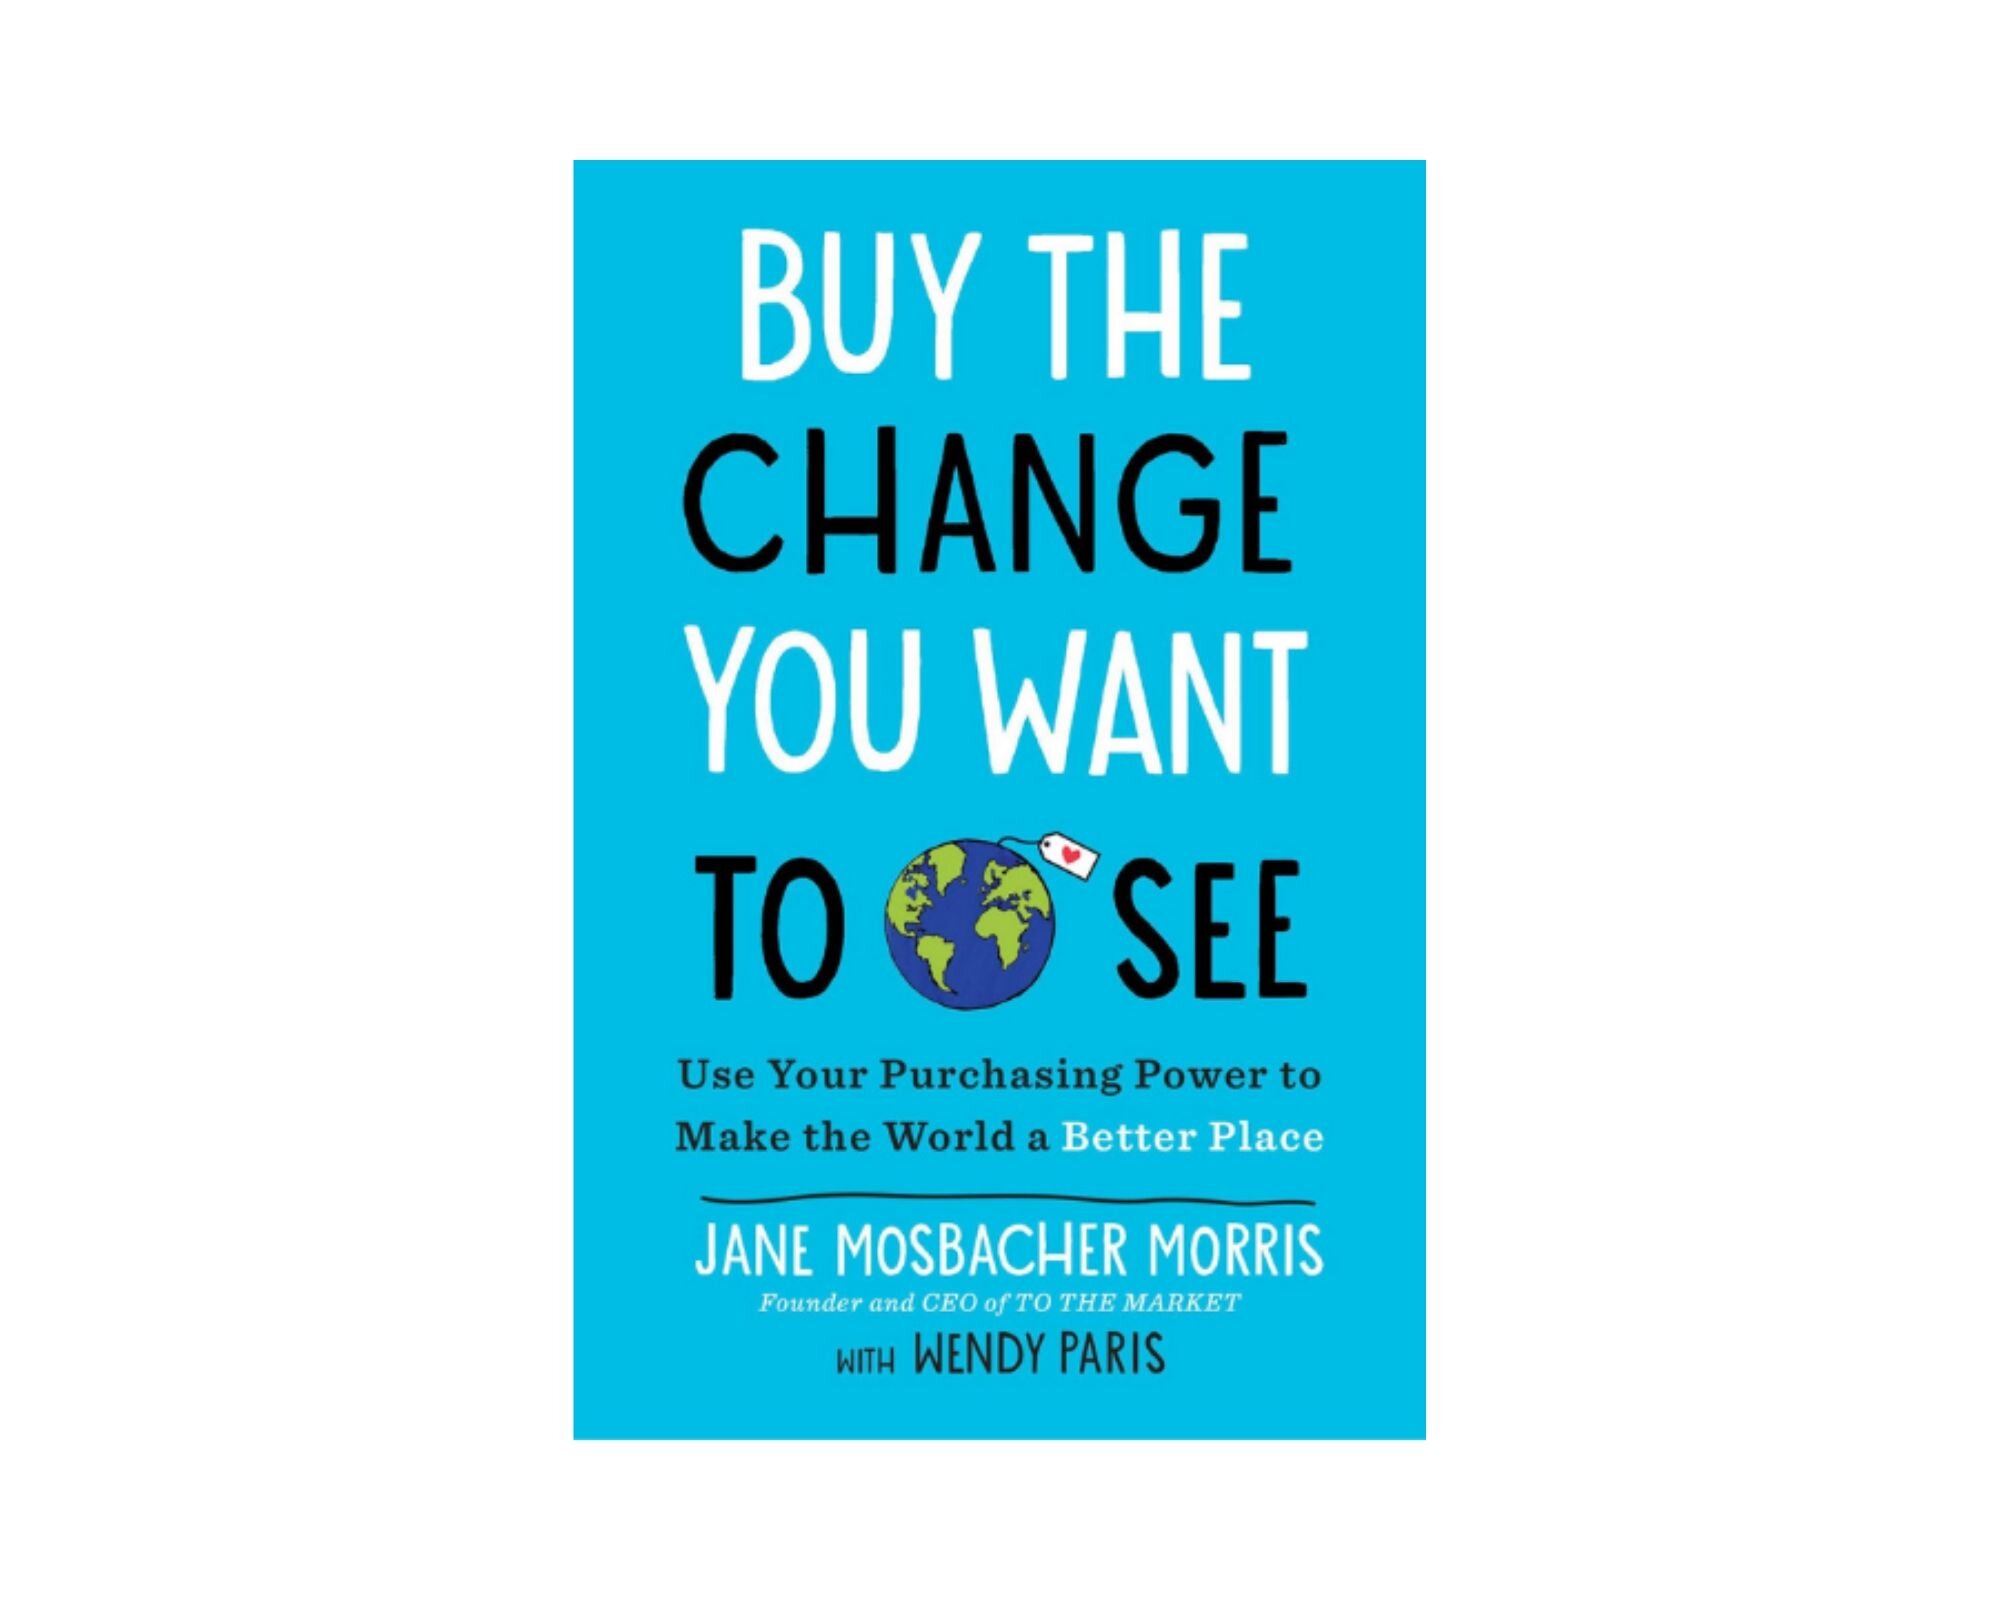 Buy the Change You Want to See Book ($7.65)